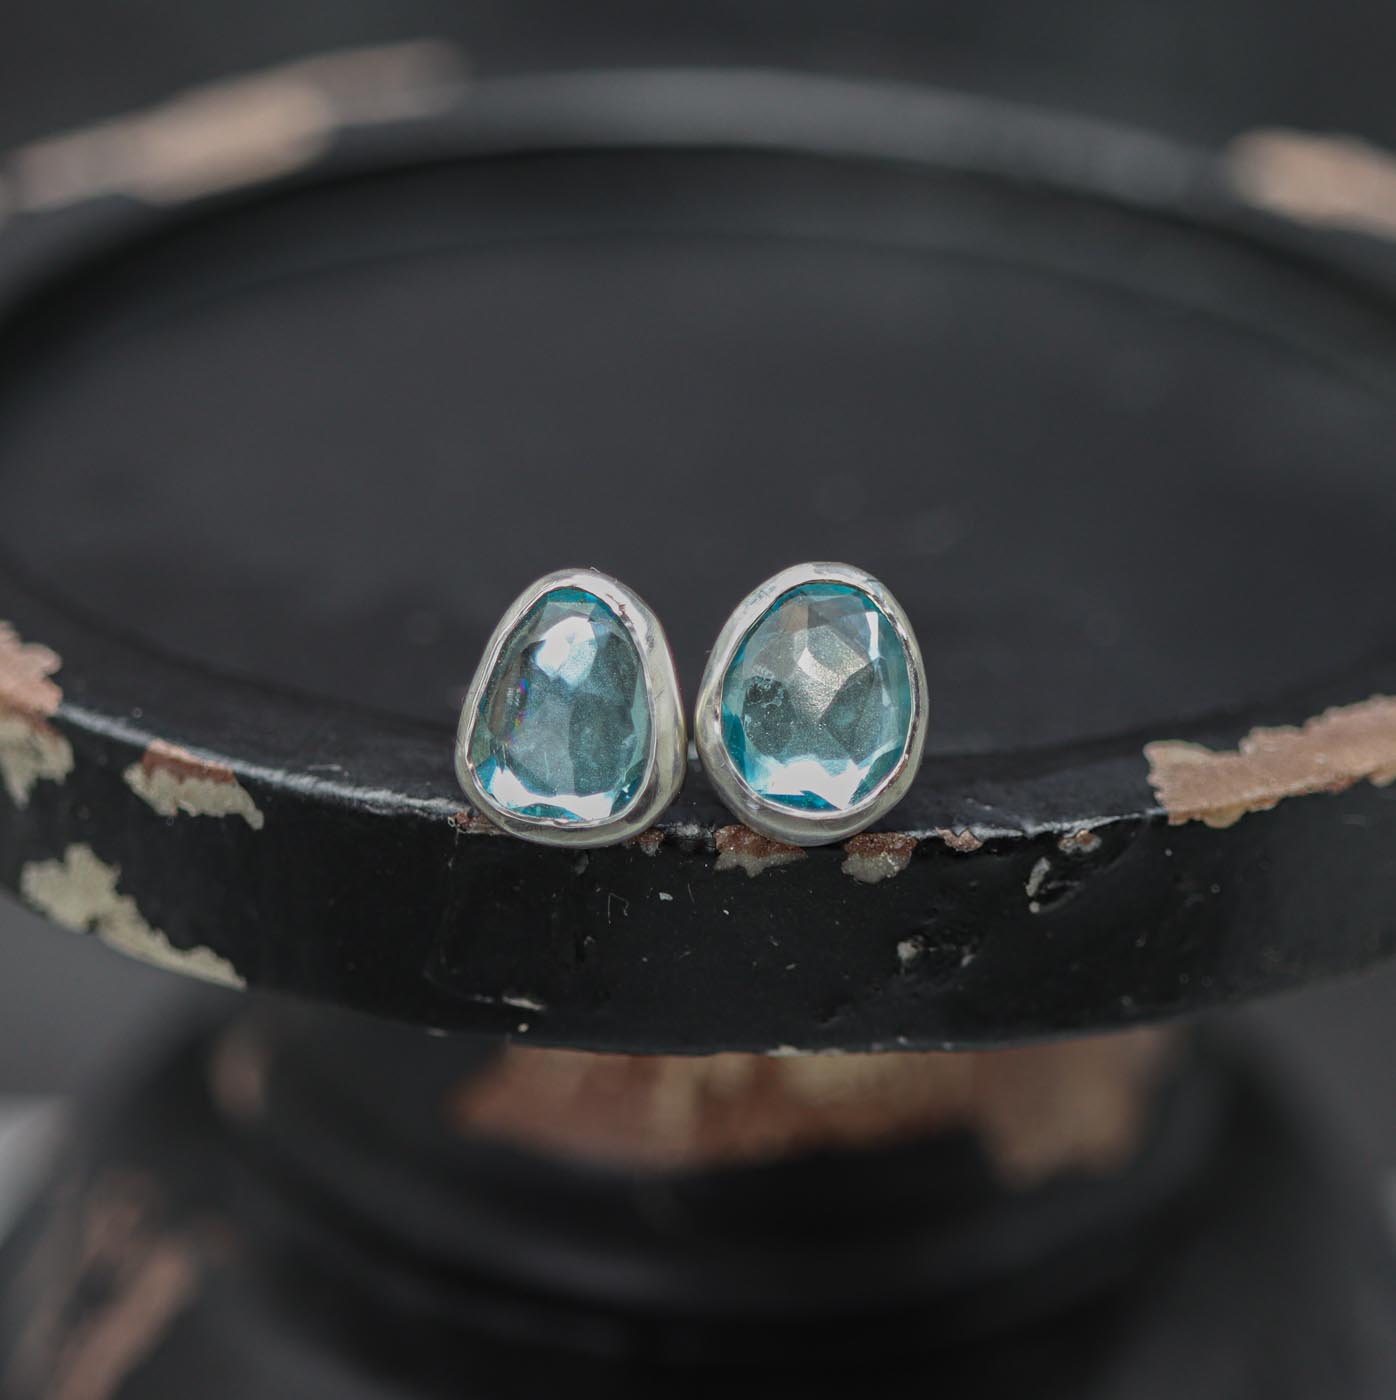 Sparkly Blue Topaz Stud Earrings Sterling Silver